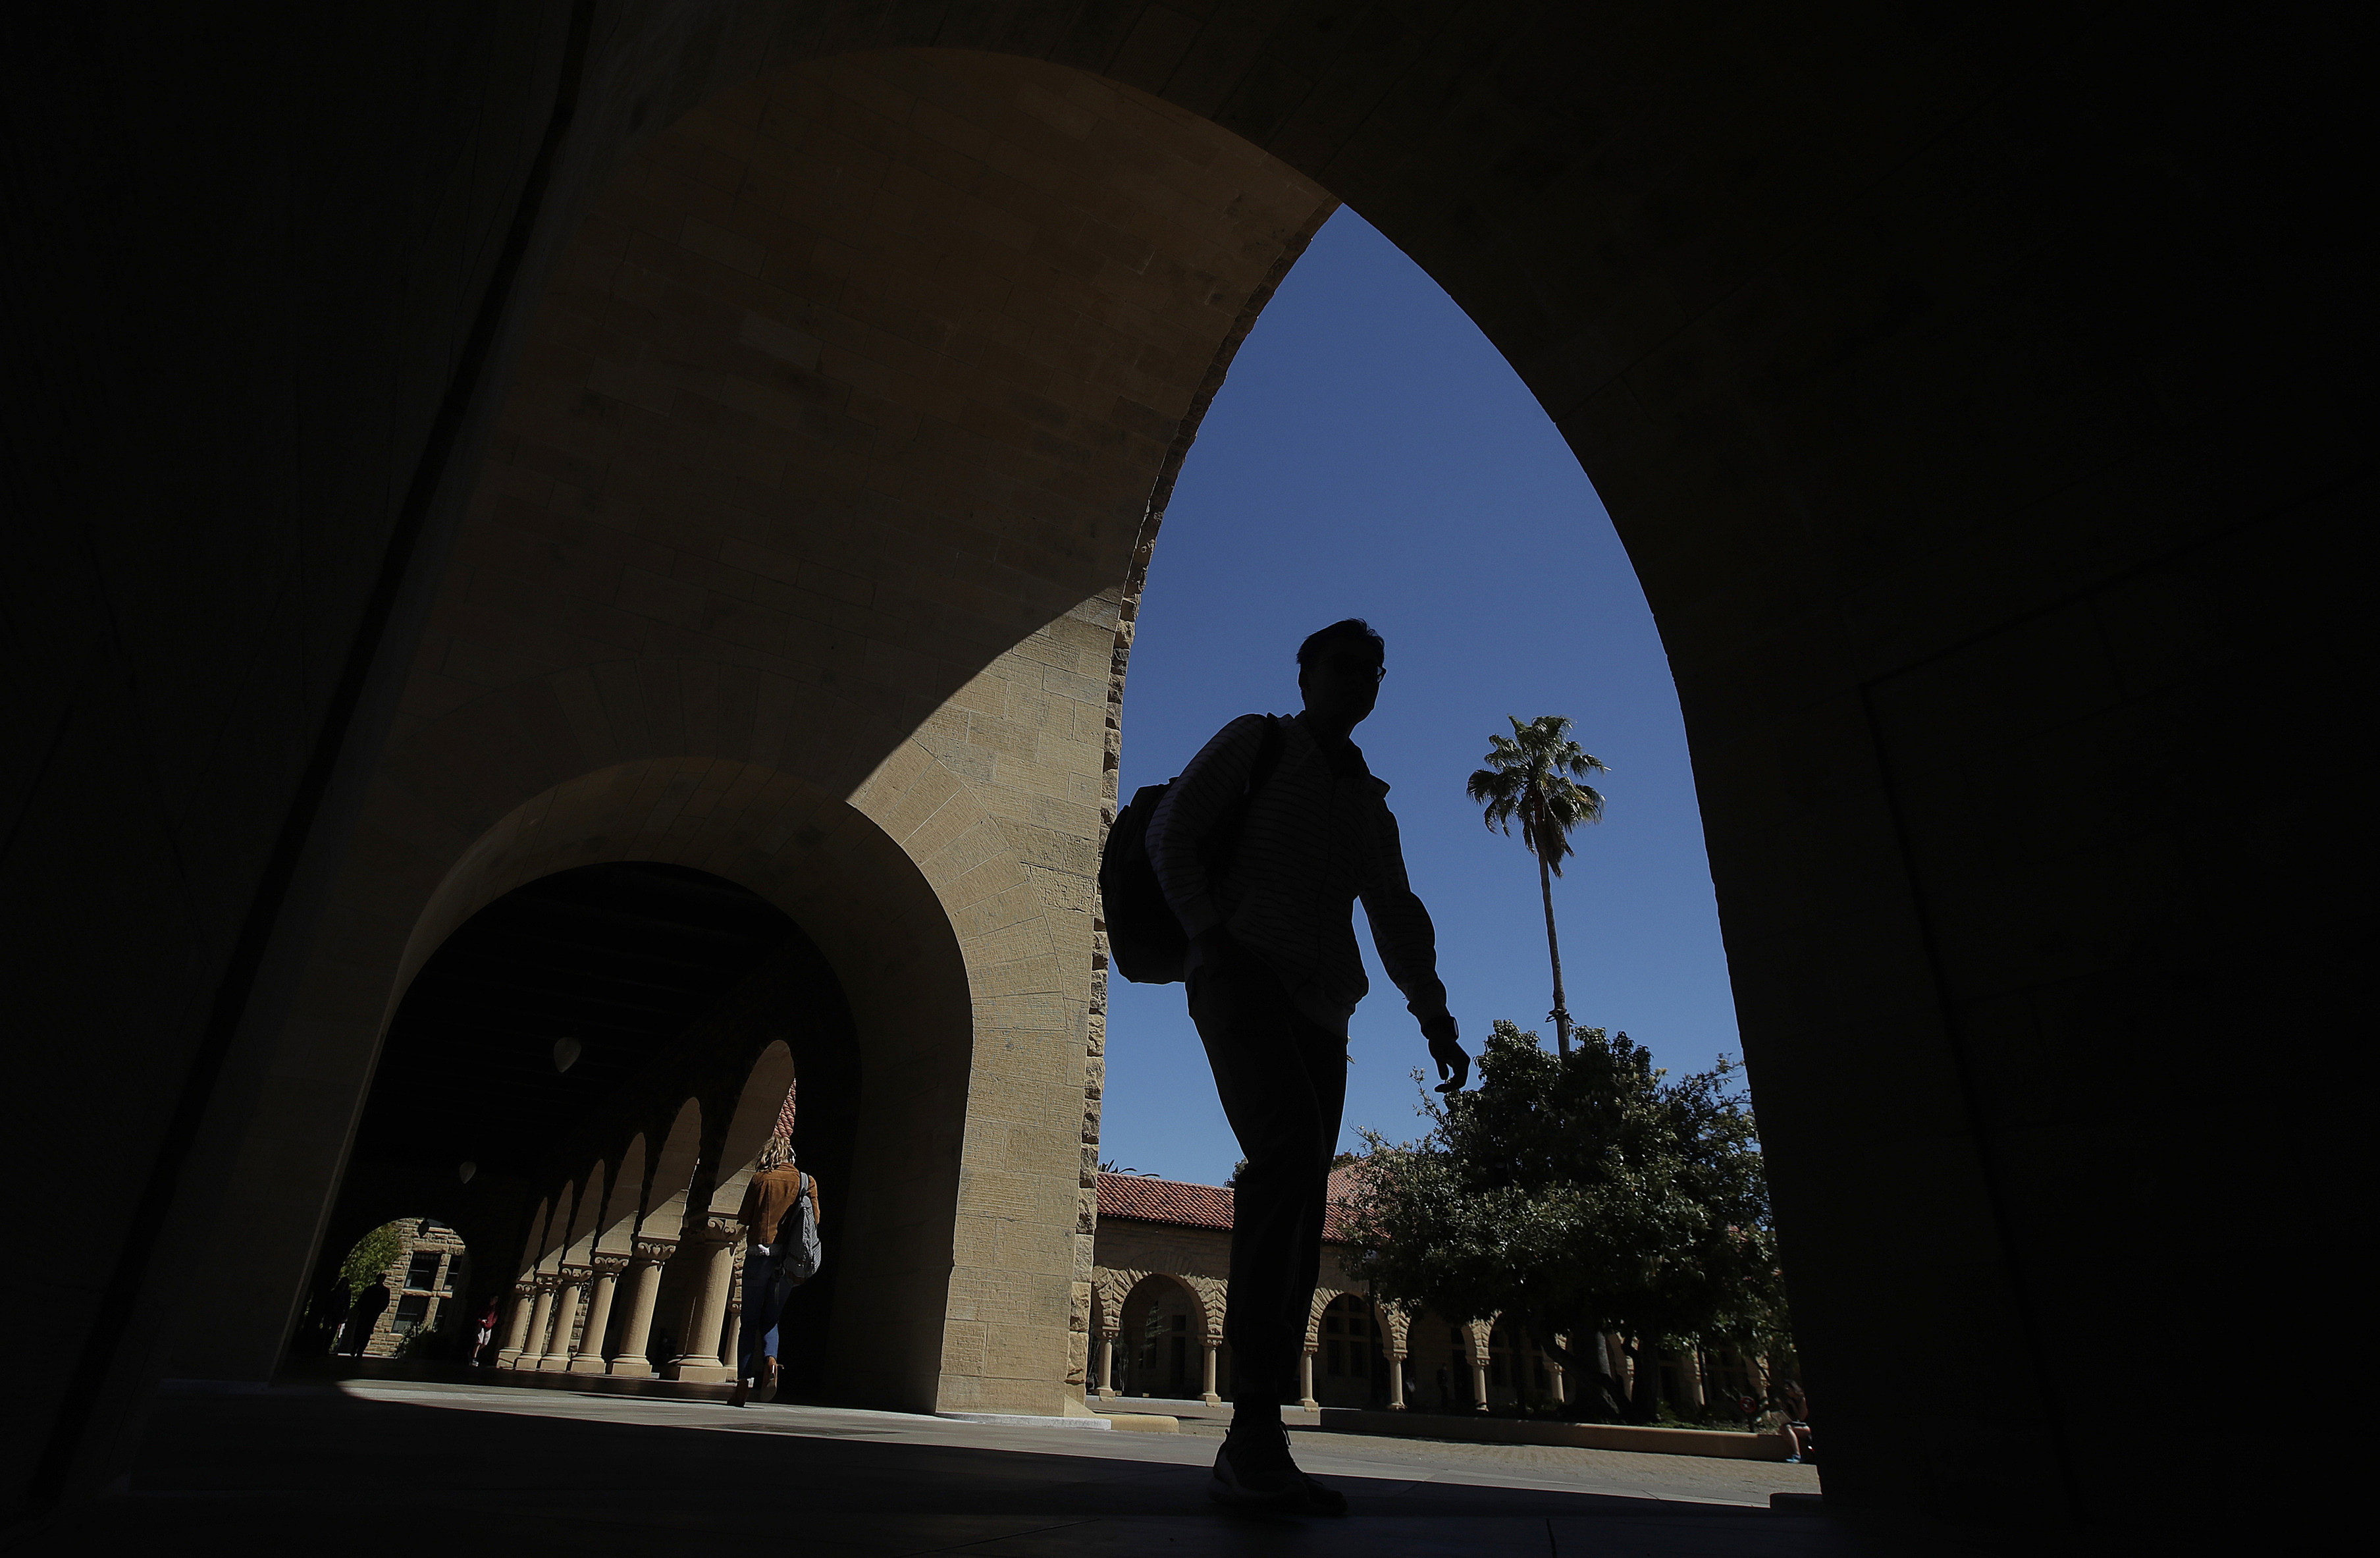 Stanford University recently launched a “Elimination of Harmful Language Initiative”. Photo: AP